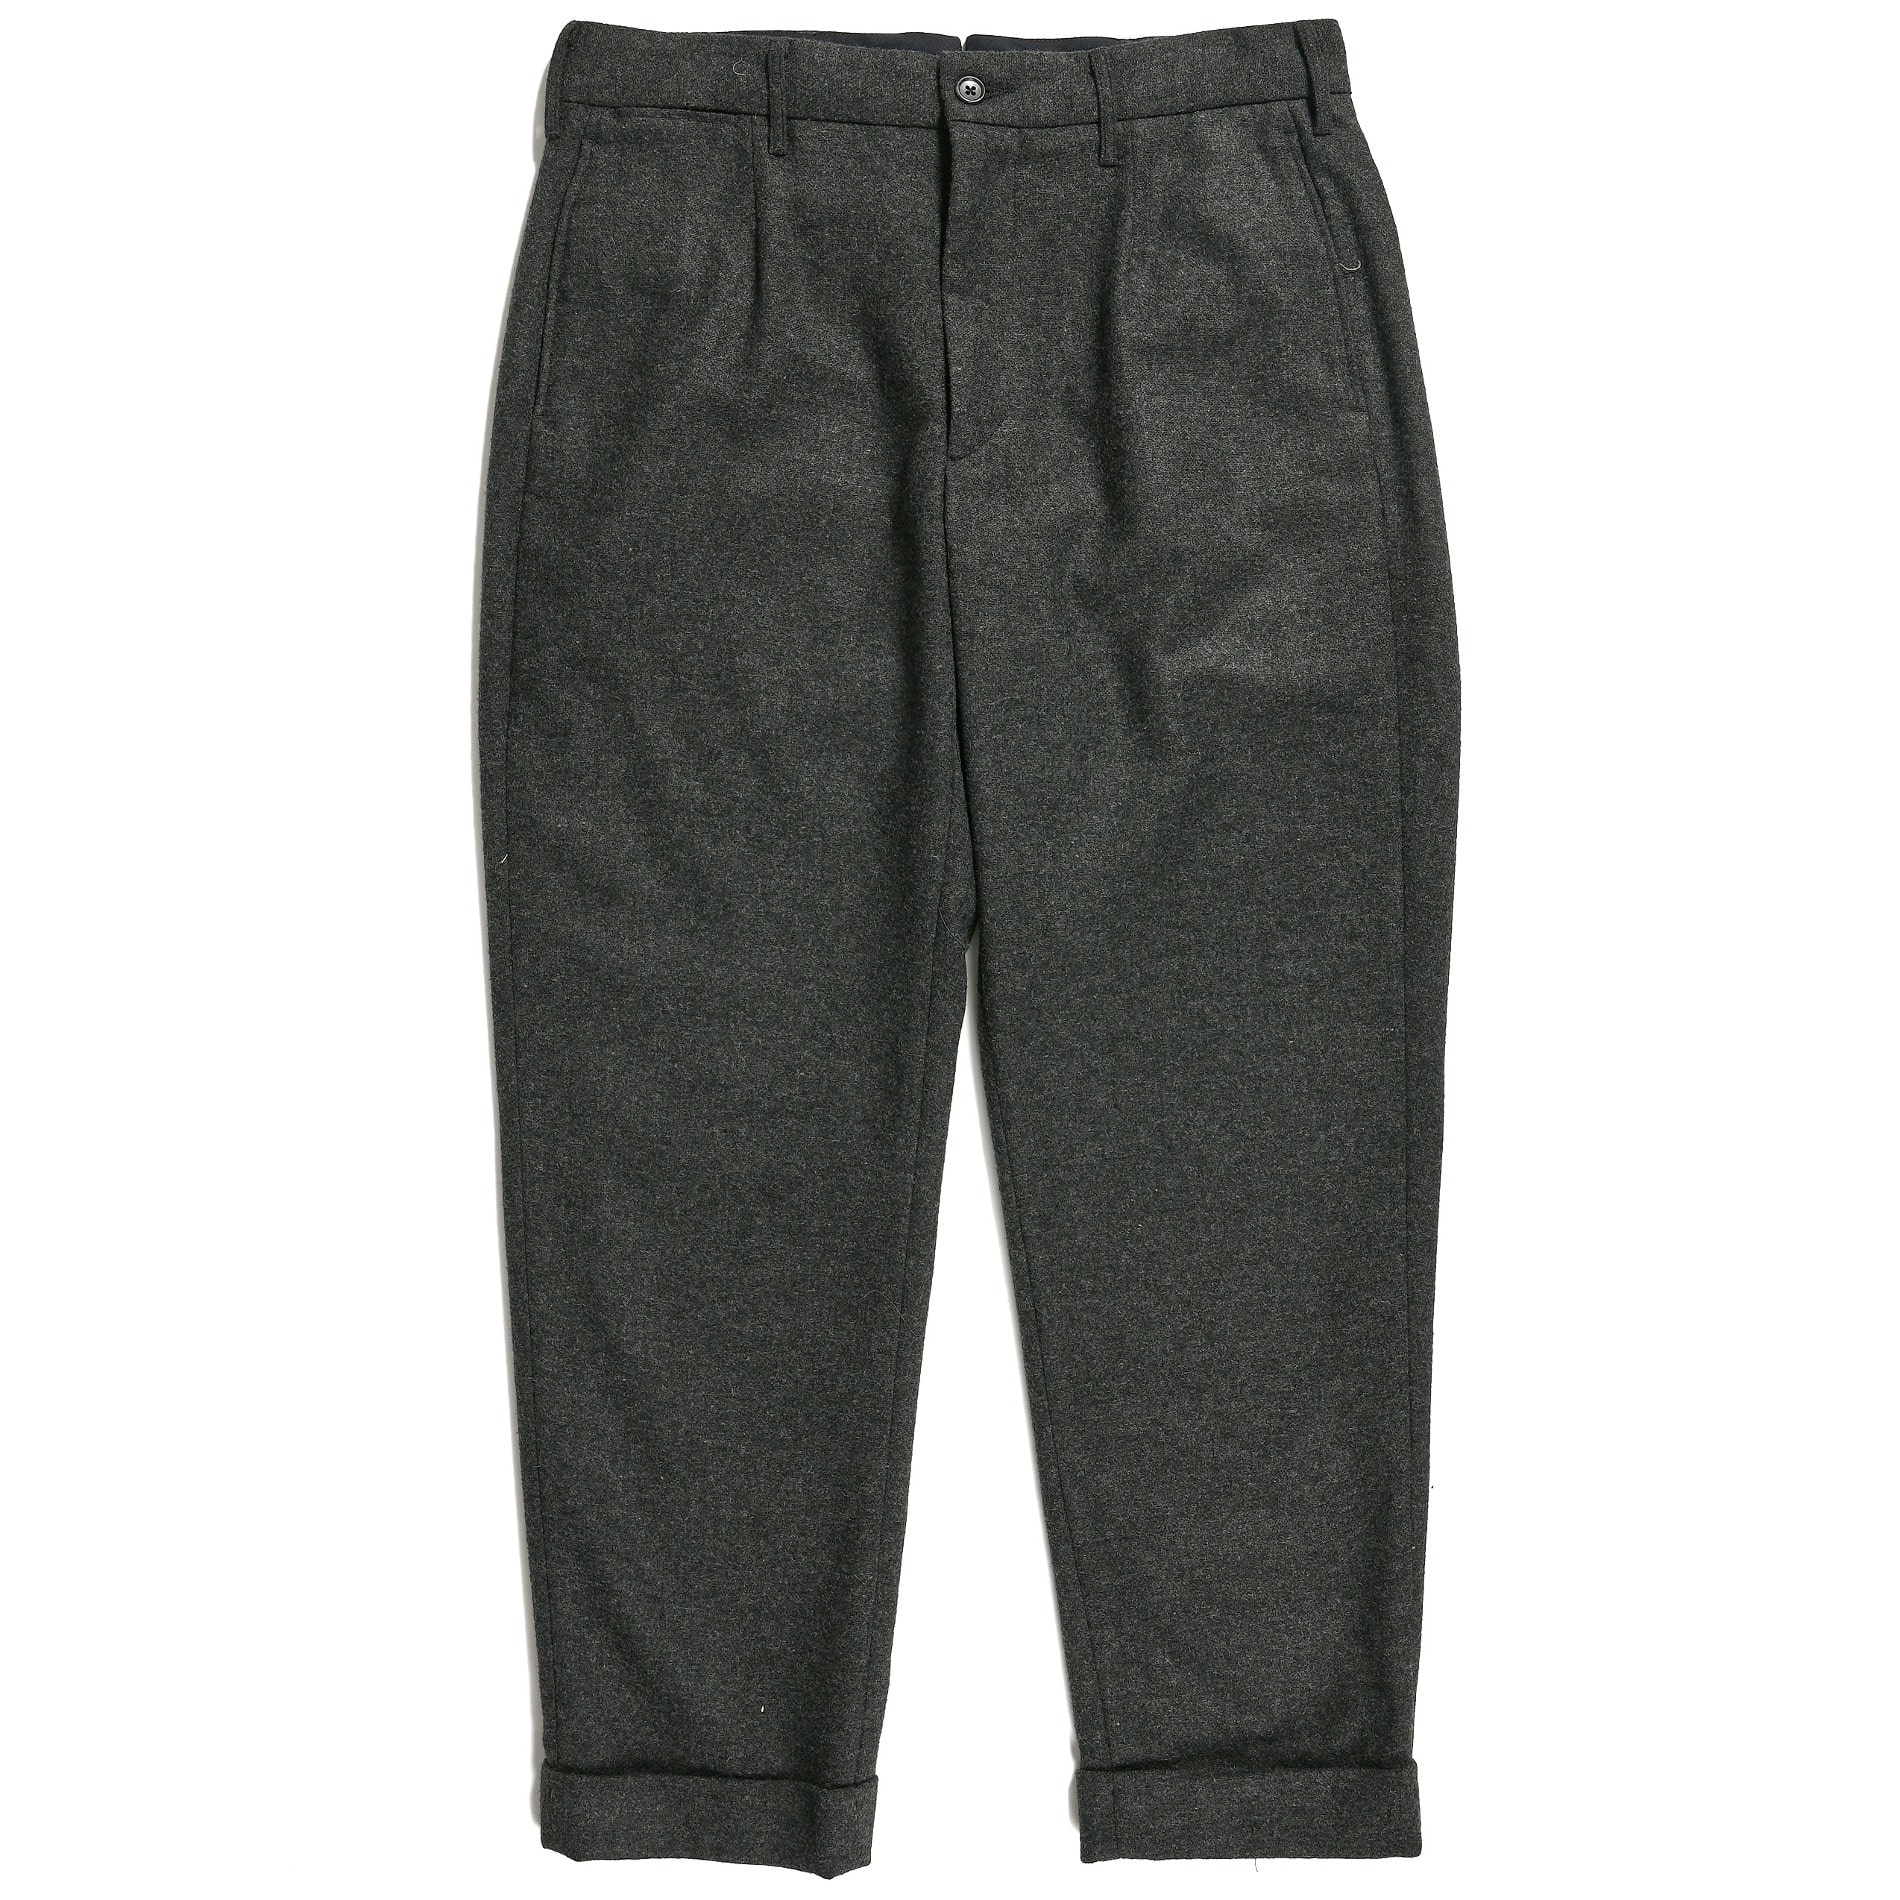 AW23 ENGINEERED GARMENTS ANDOVER PANT GREY SOLID POLY WOOL FLANNEL